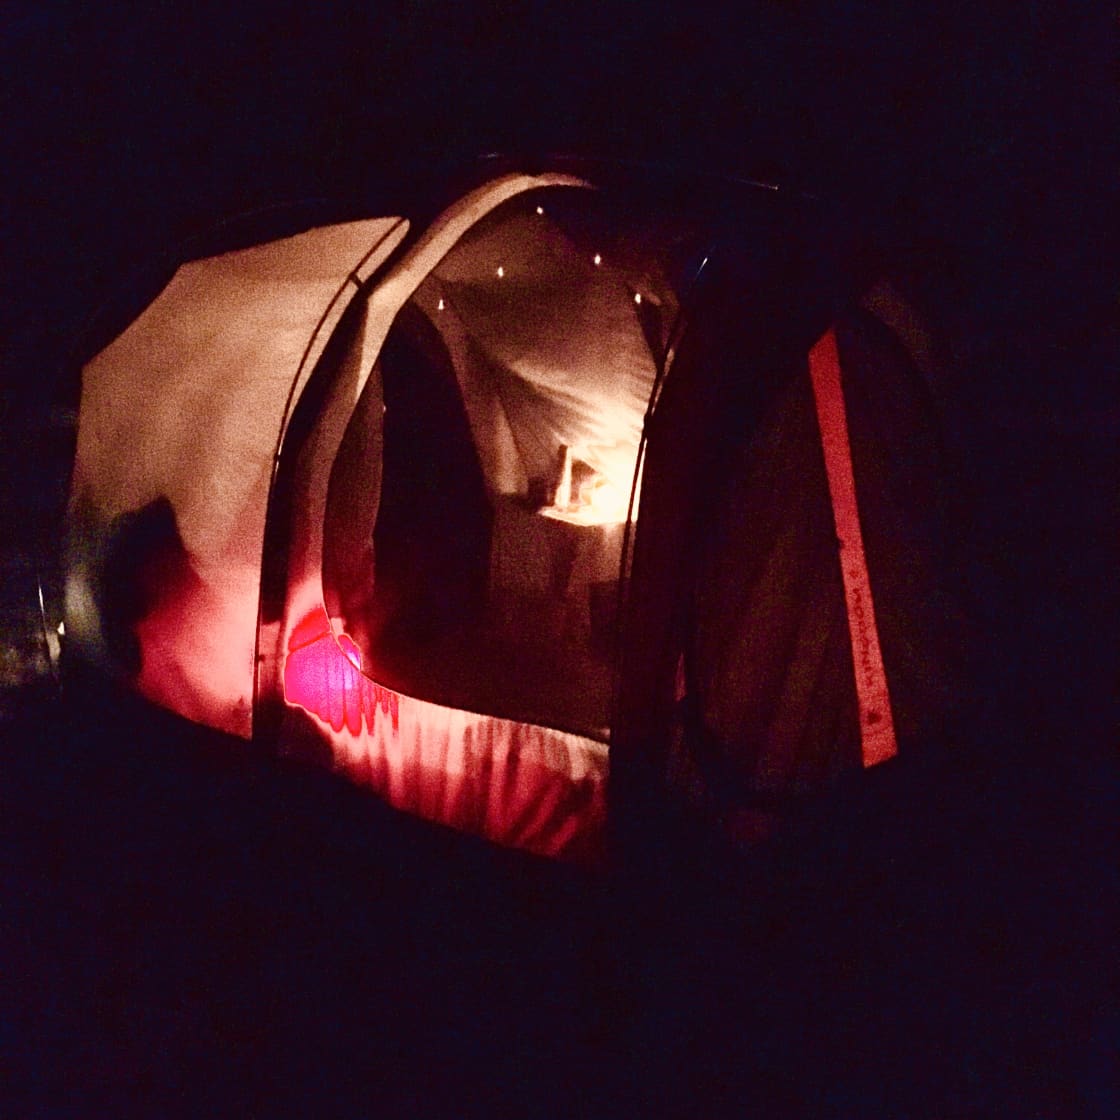 The actual Stargazer Tent - illuminated at night. 8 x 12 feet with two rooms and 6 1/2 foot ceiling.